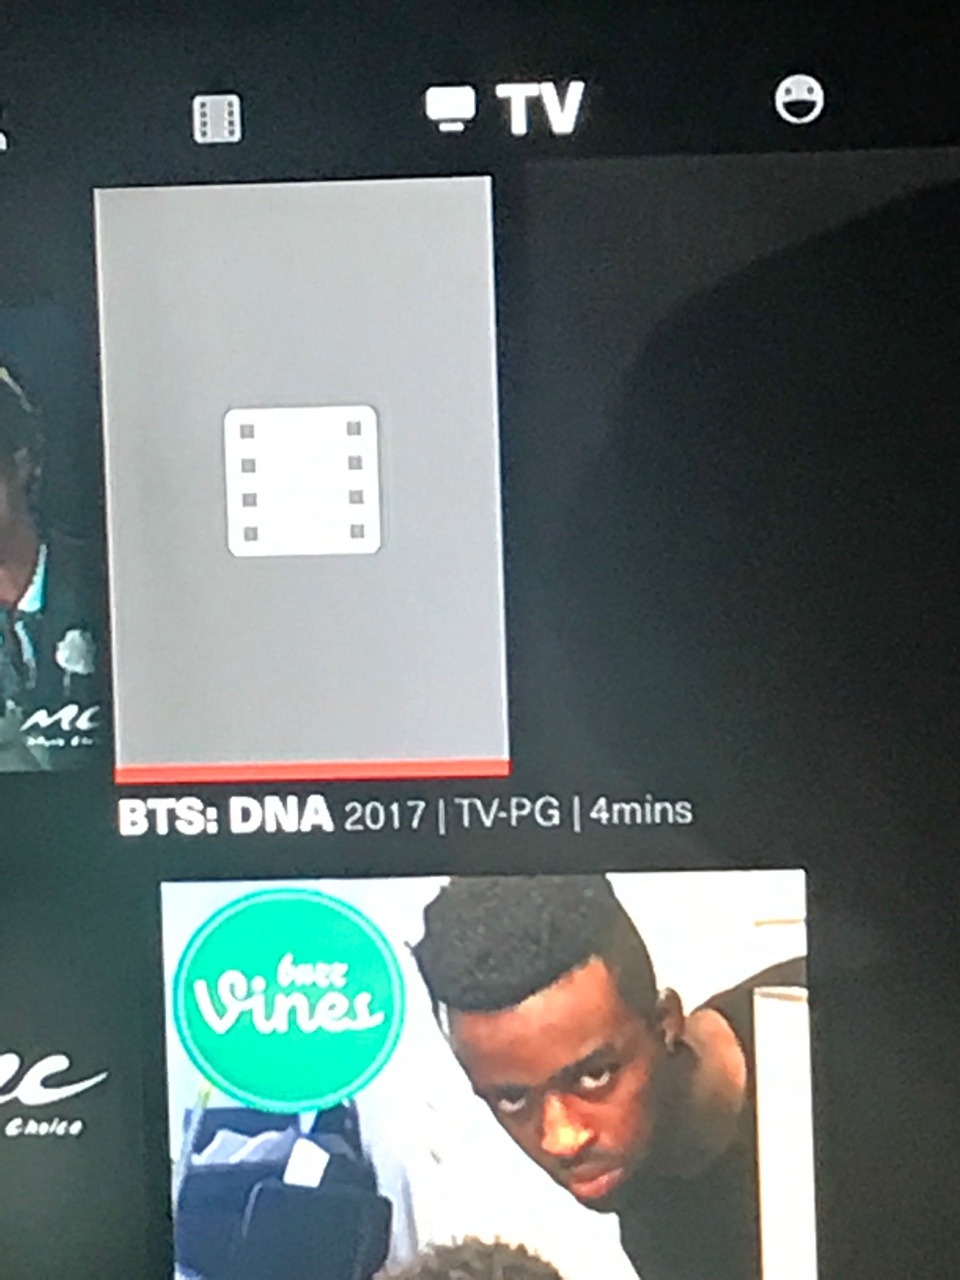 Holy shit!!!! I just saw BTS new song on Choice on demand!!!!!!!! So proud of their achievements with their new comeback.